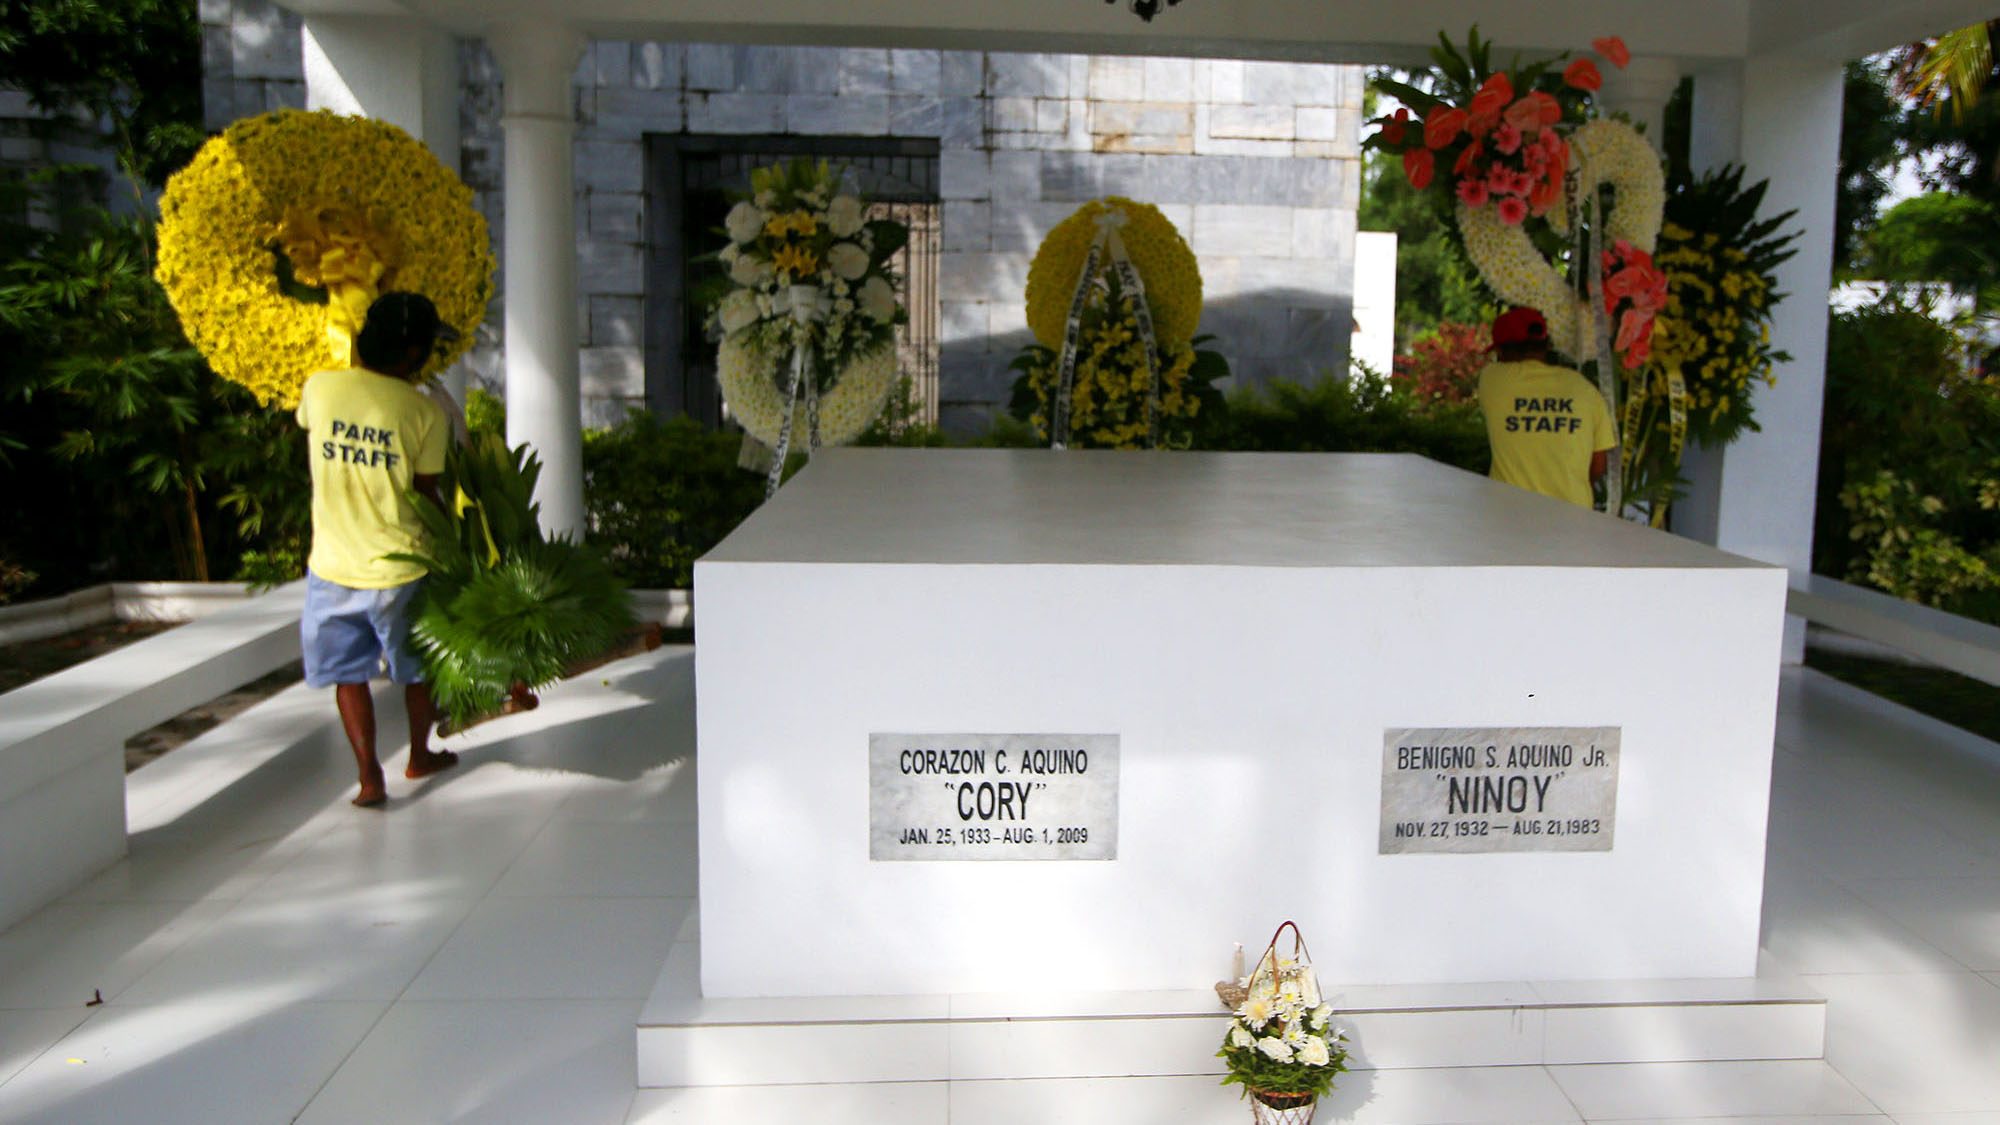 Noynoy to be laid to rest beside Cory, Ninoy Aquino